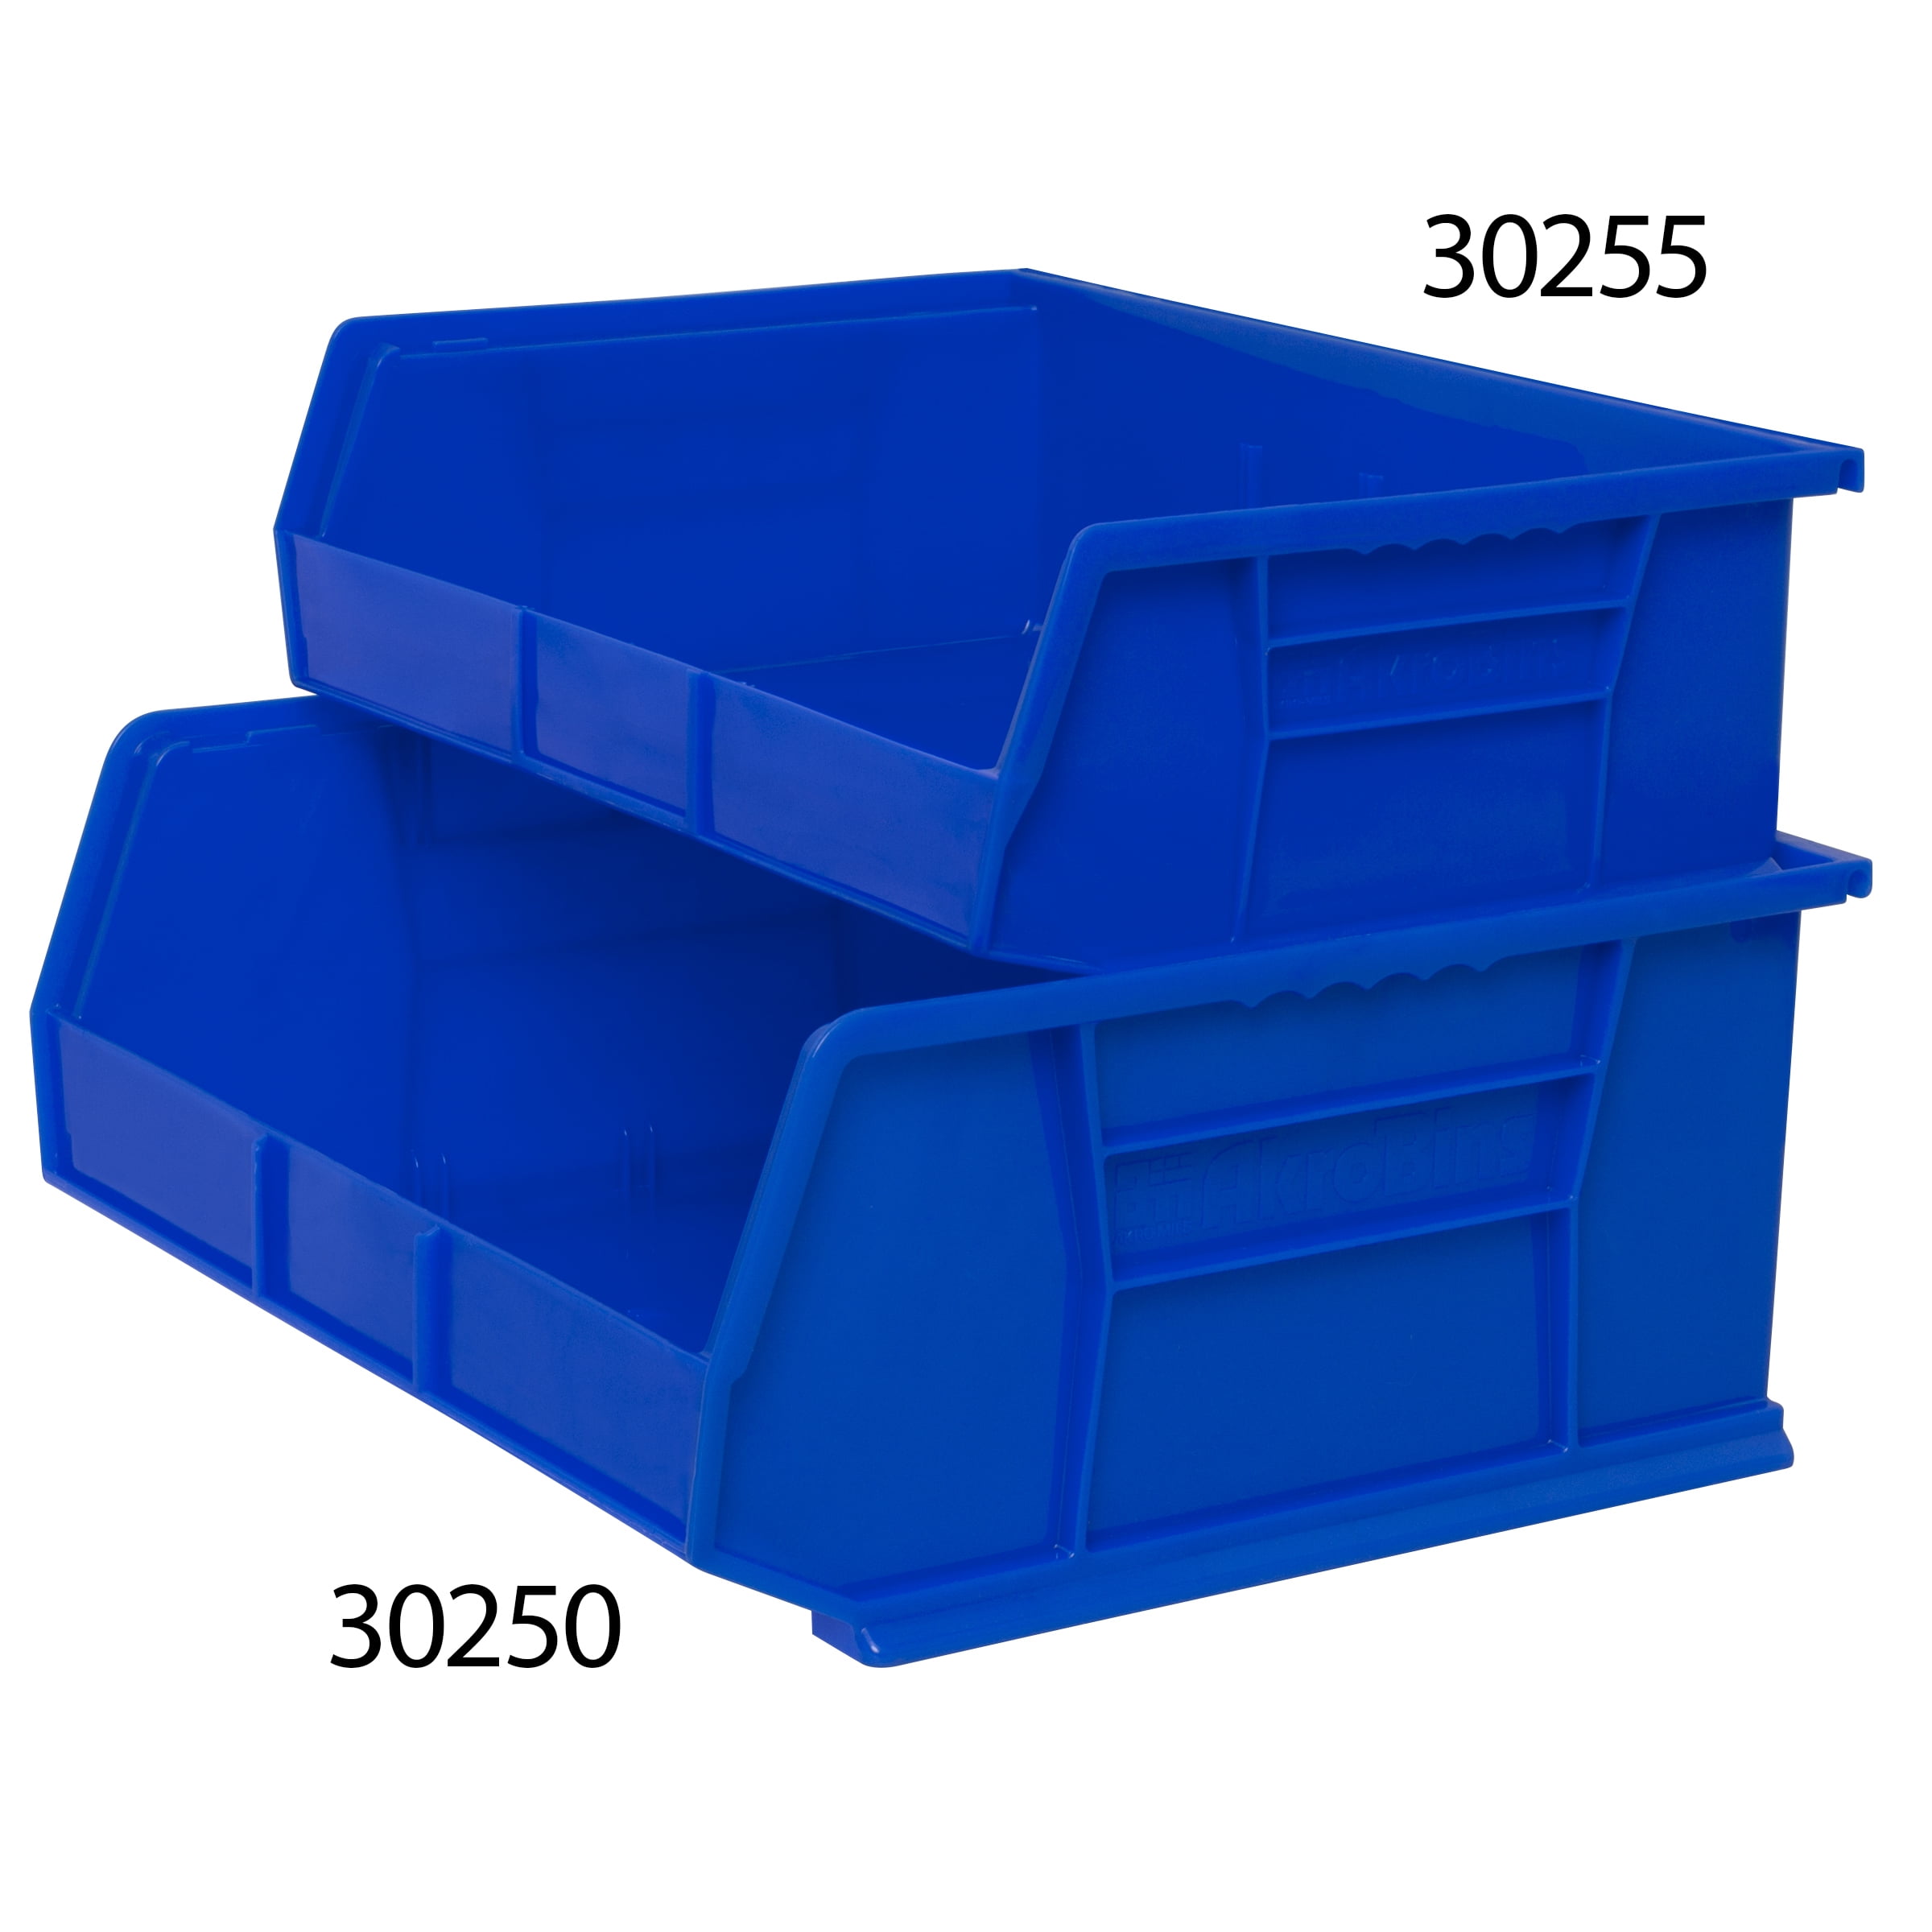  topseller100, Pack of 25 sets of 8x10 BLUE Picture